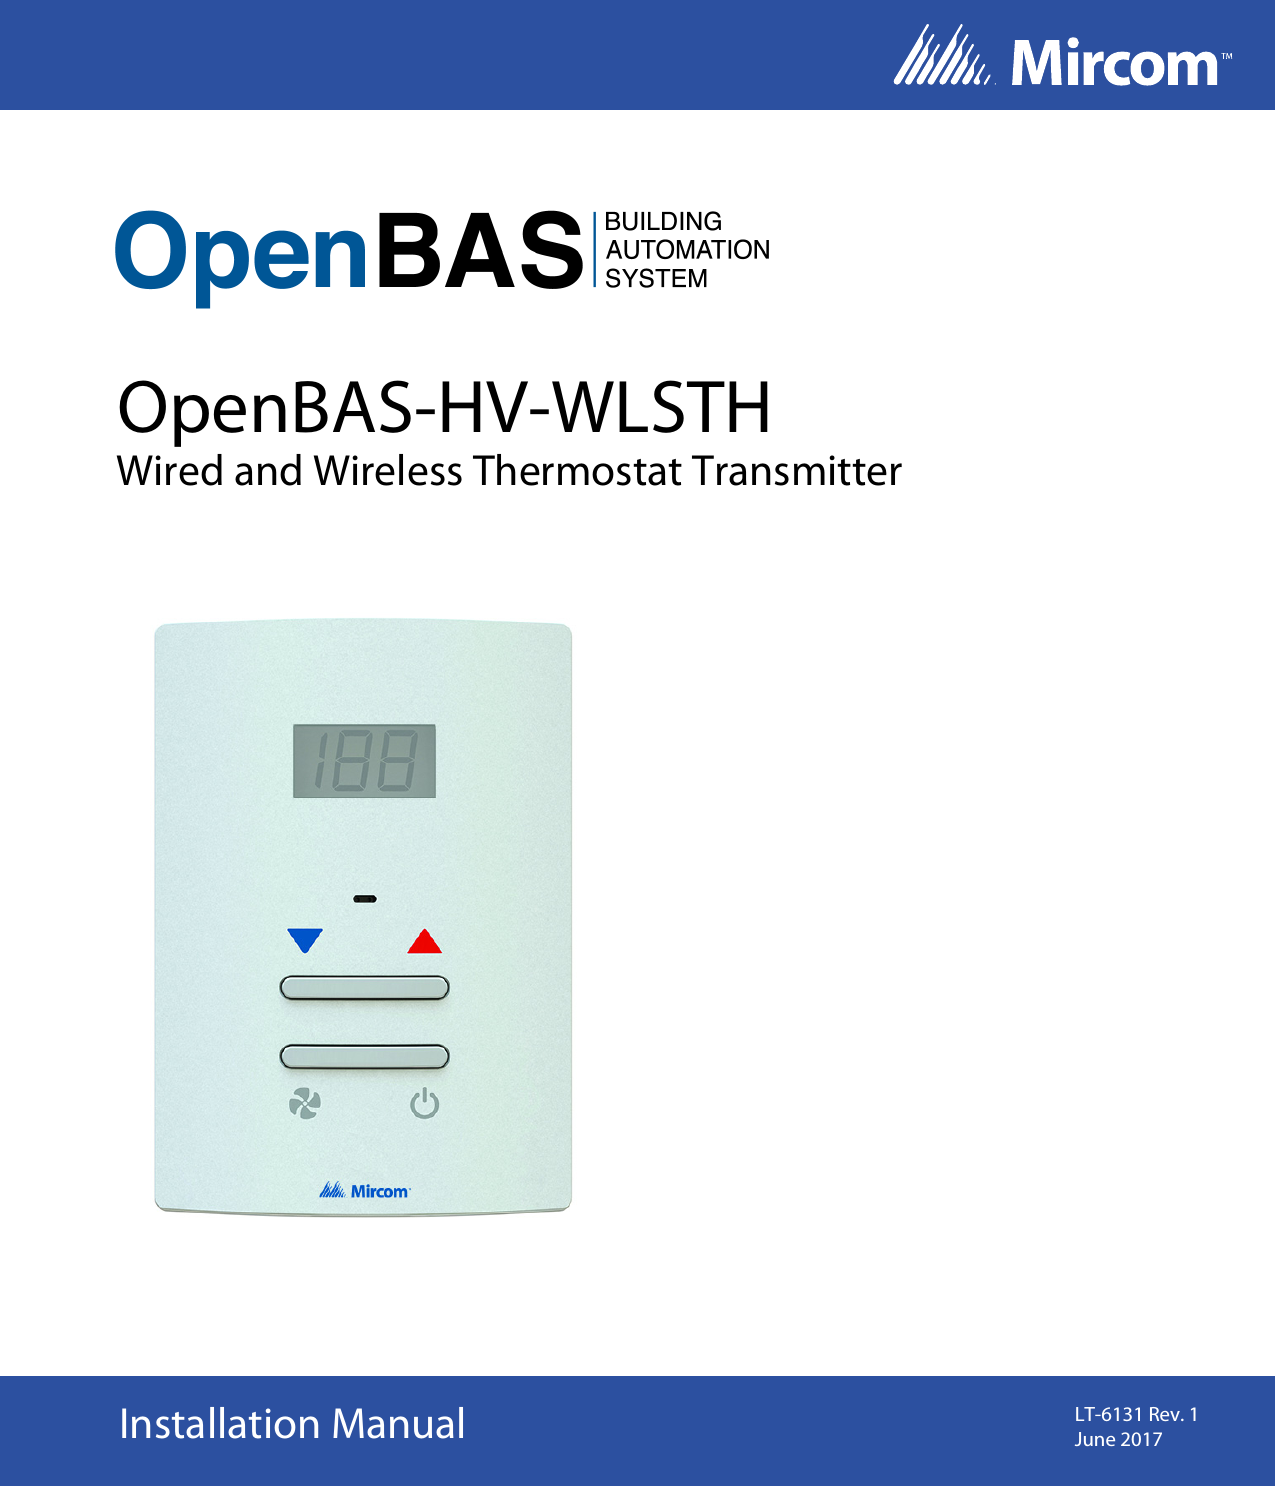 Installation ManualWired and Wireless Thermostat TransmitterLT-6131 Rev. 1June 2017OpenBAS-HV-WLSTH